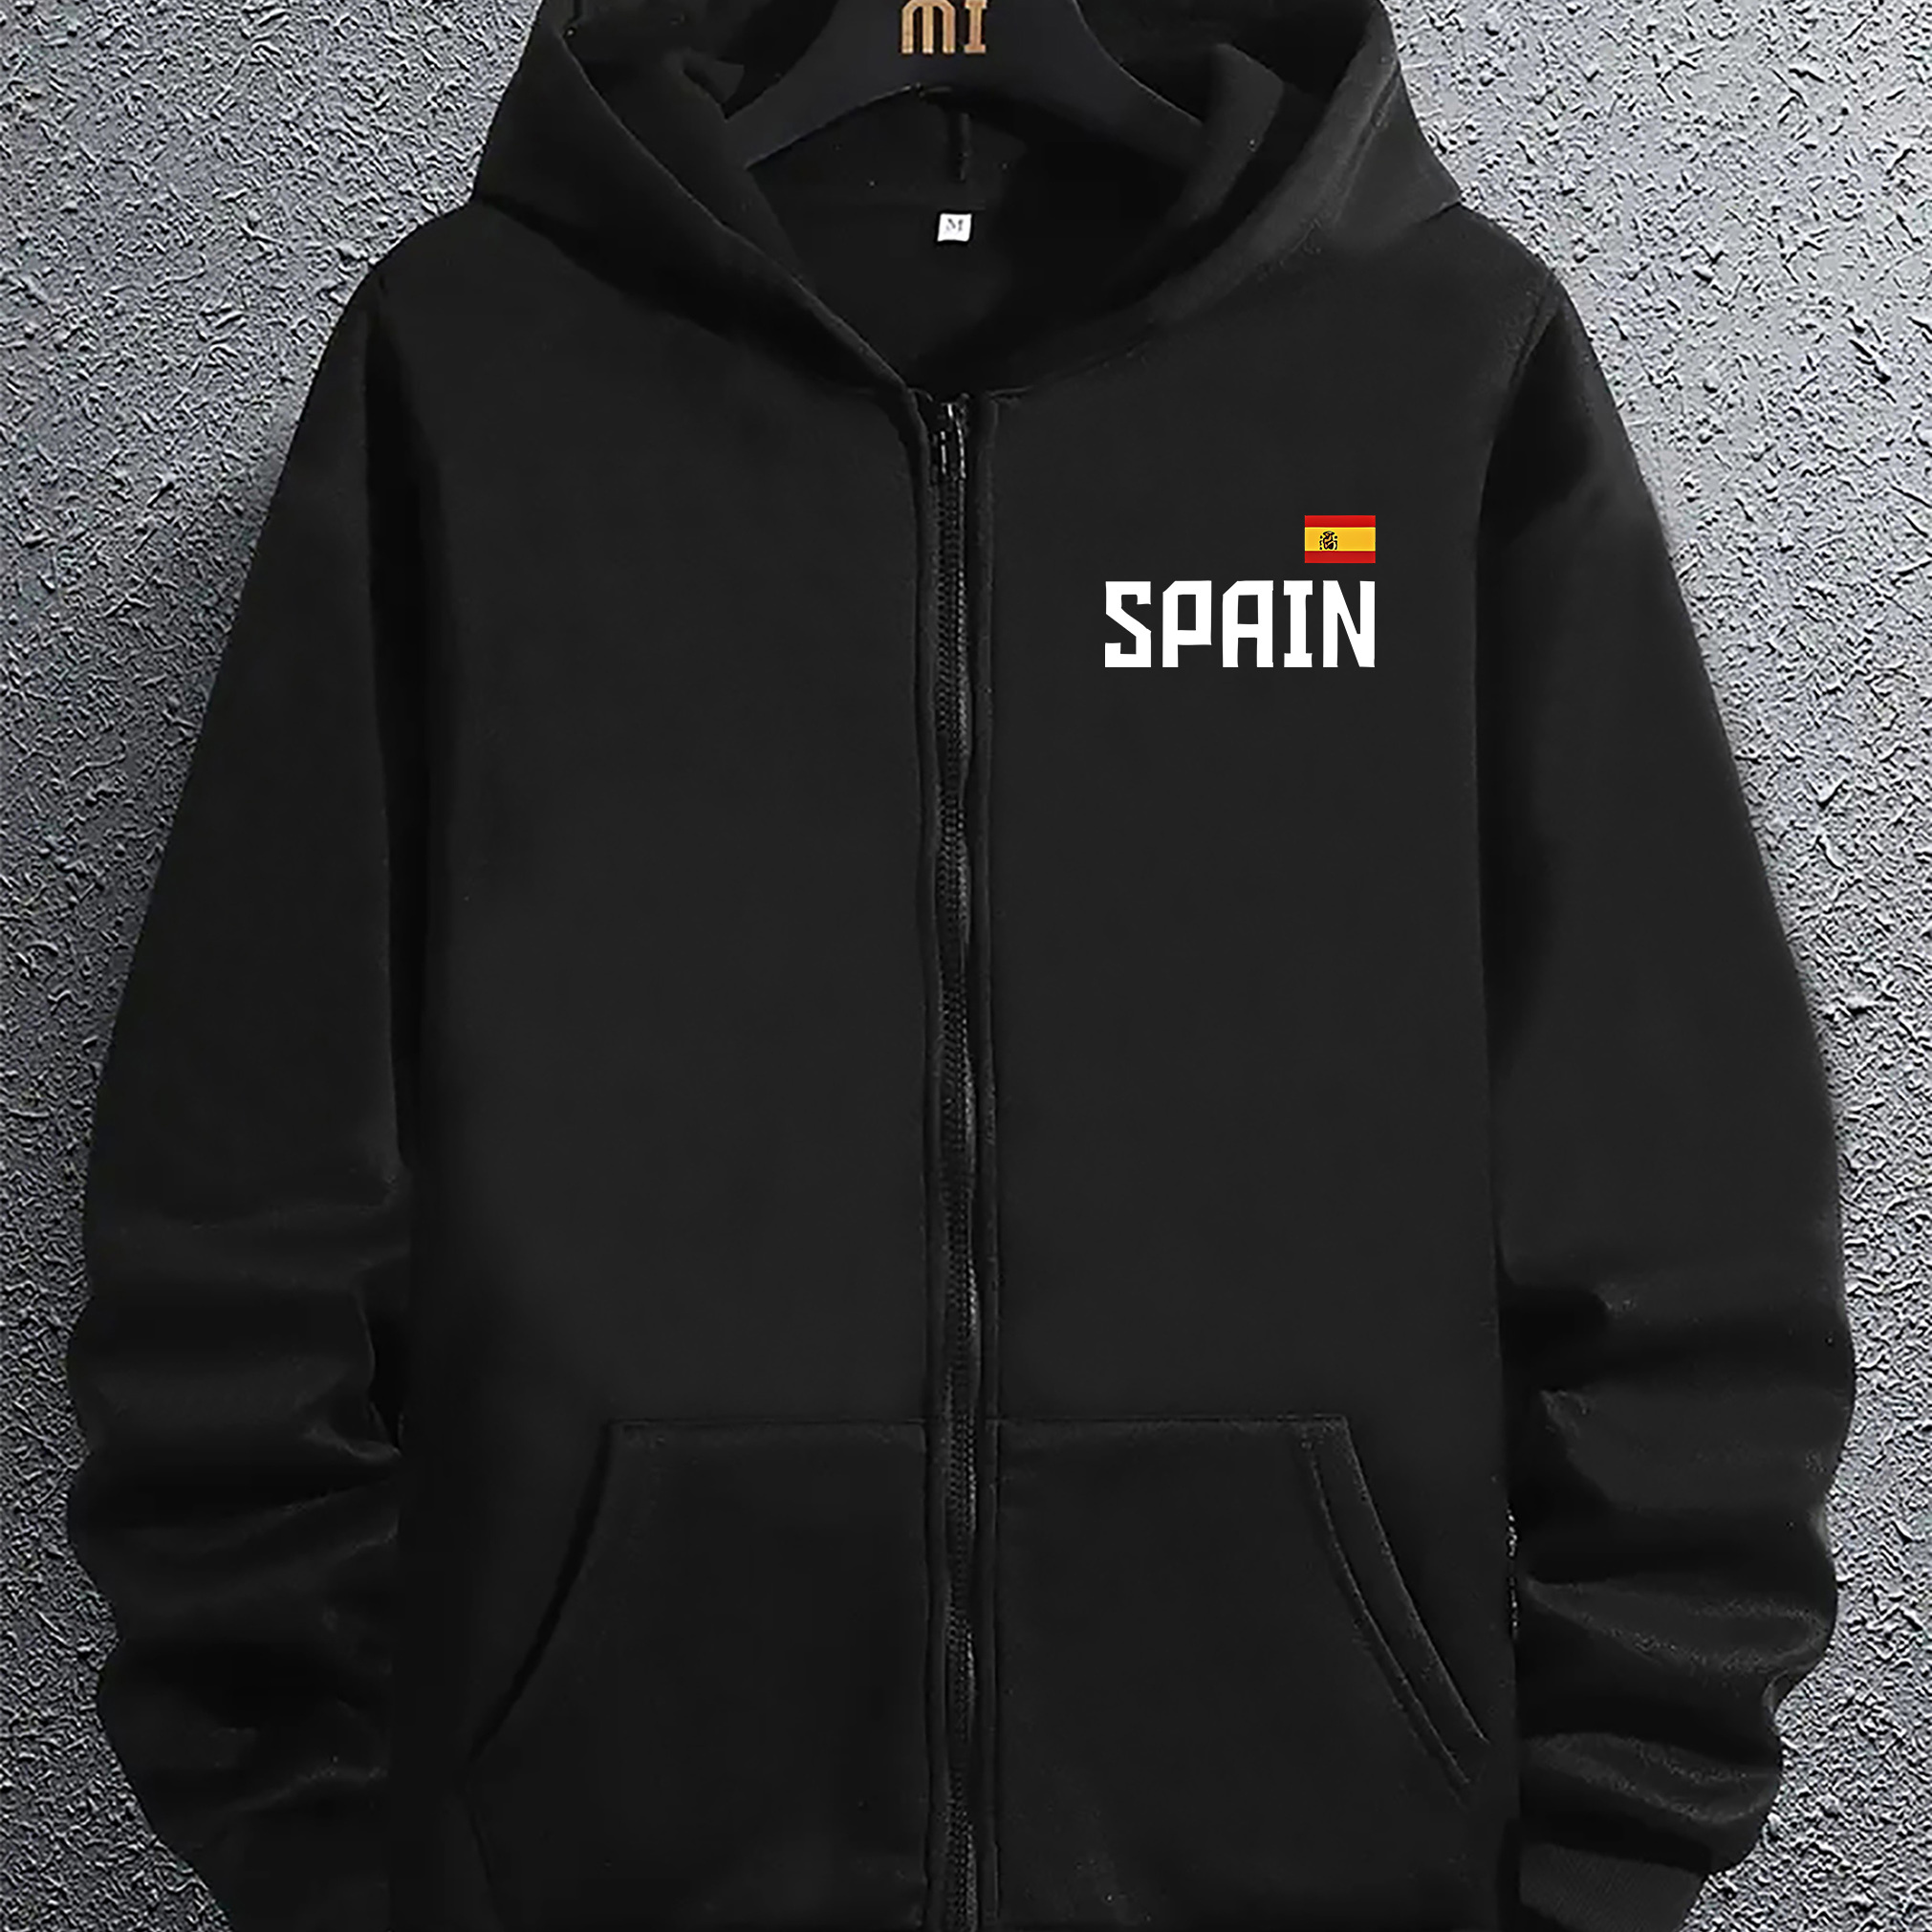 

Spain Flag Men's Fashion Trendy Zip-up Hooded Sweatshirt Casual Pullover Hoodie With English Letter Design